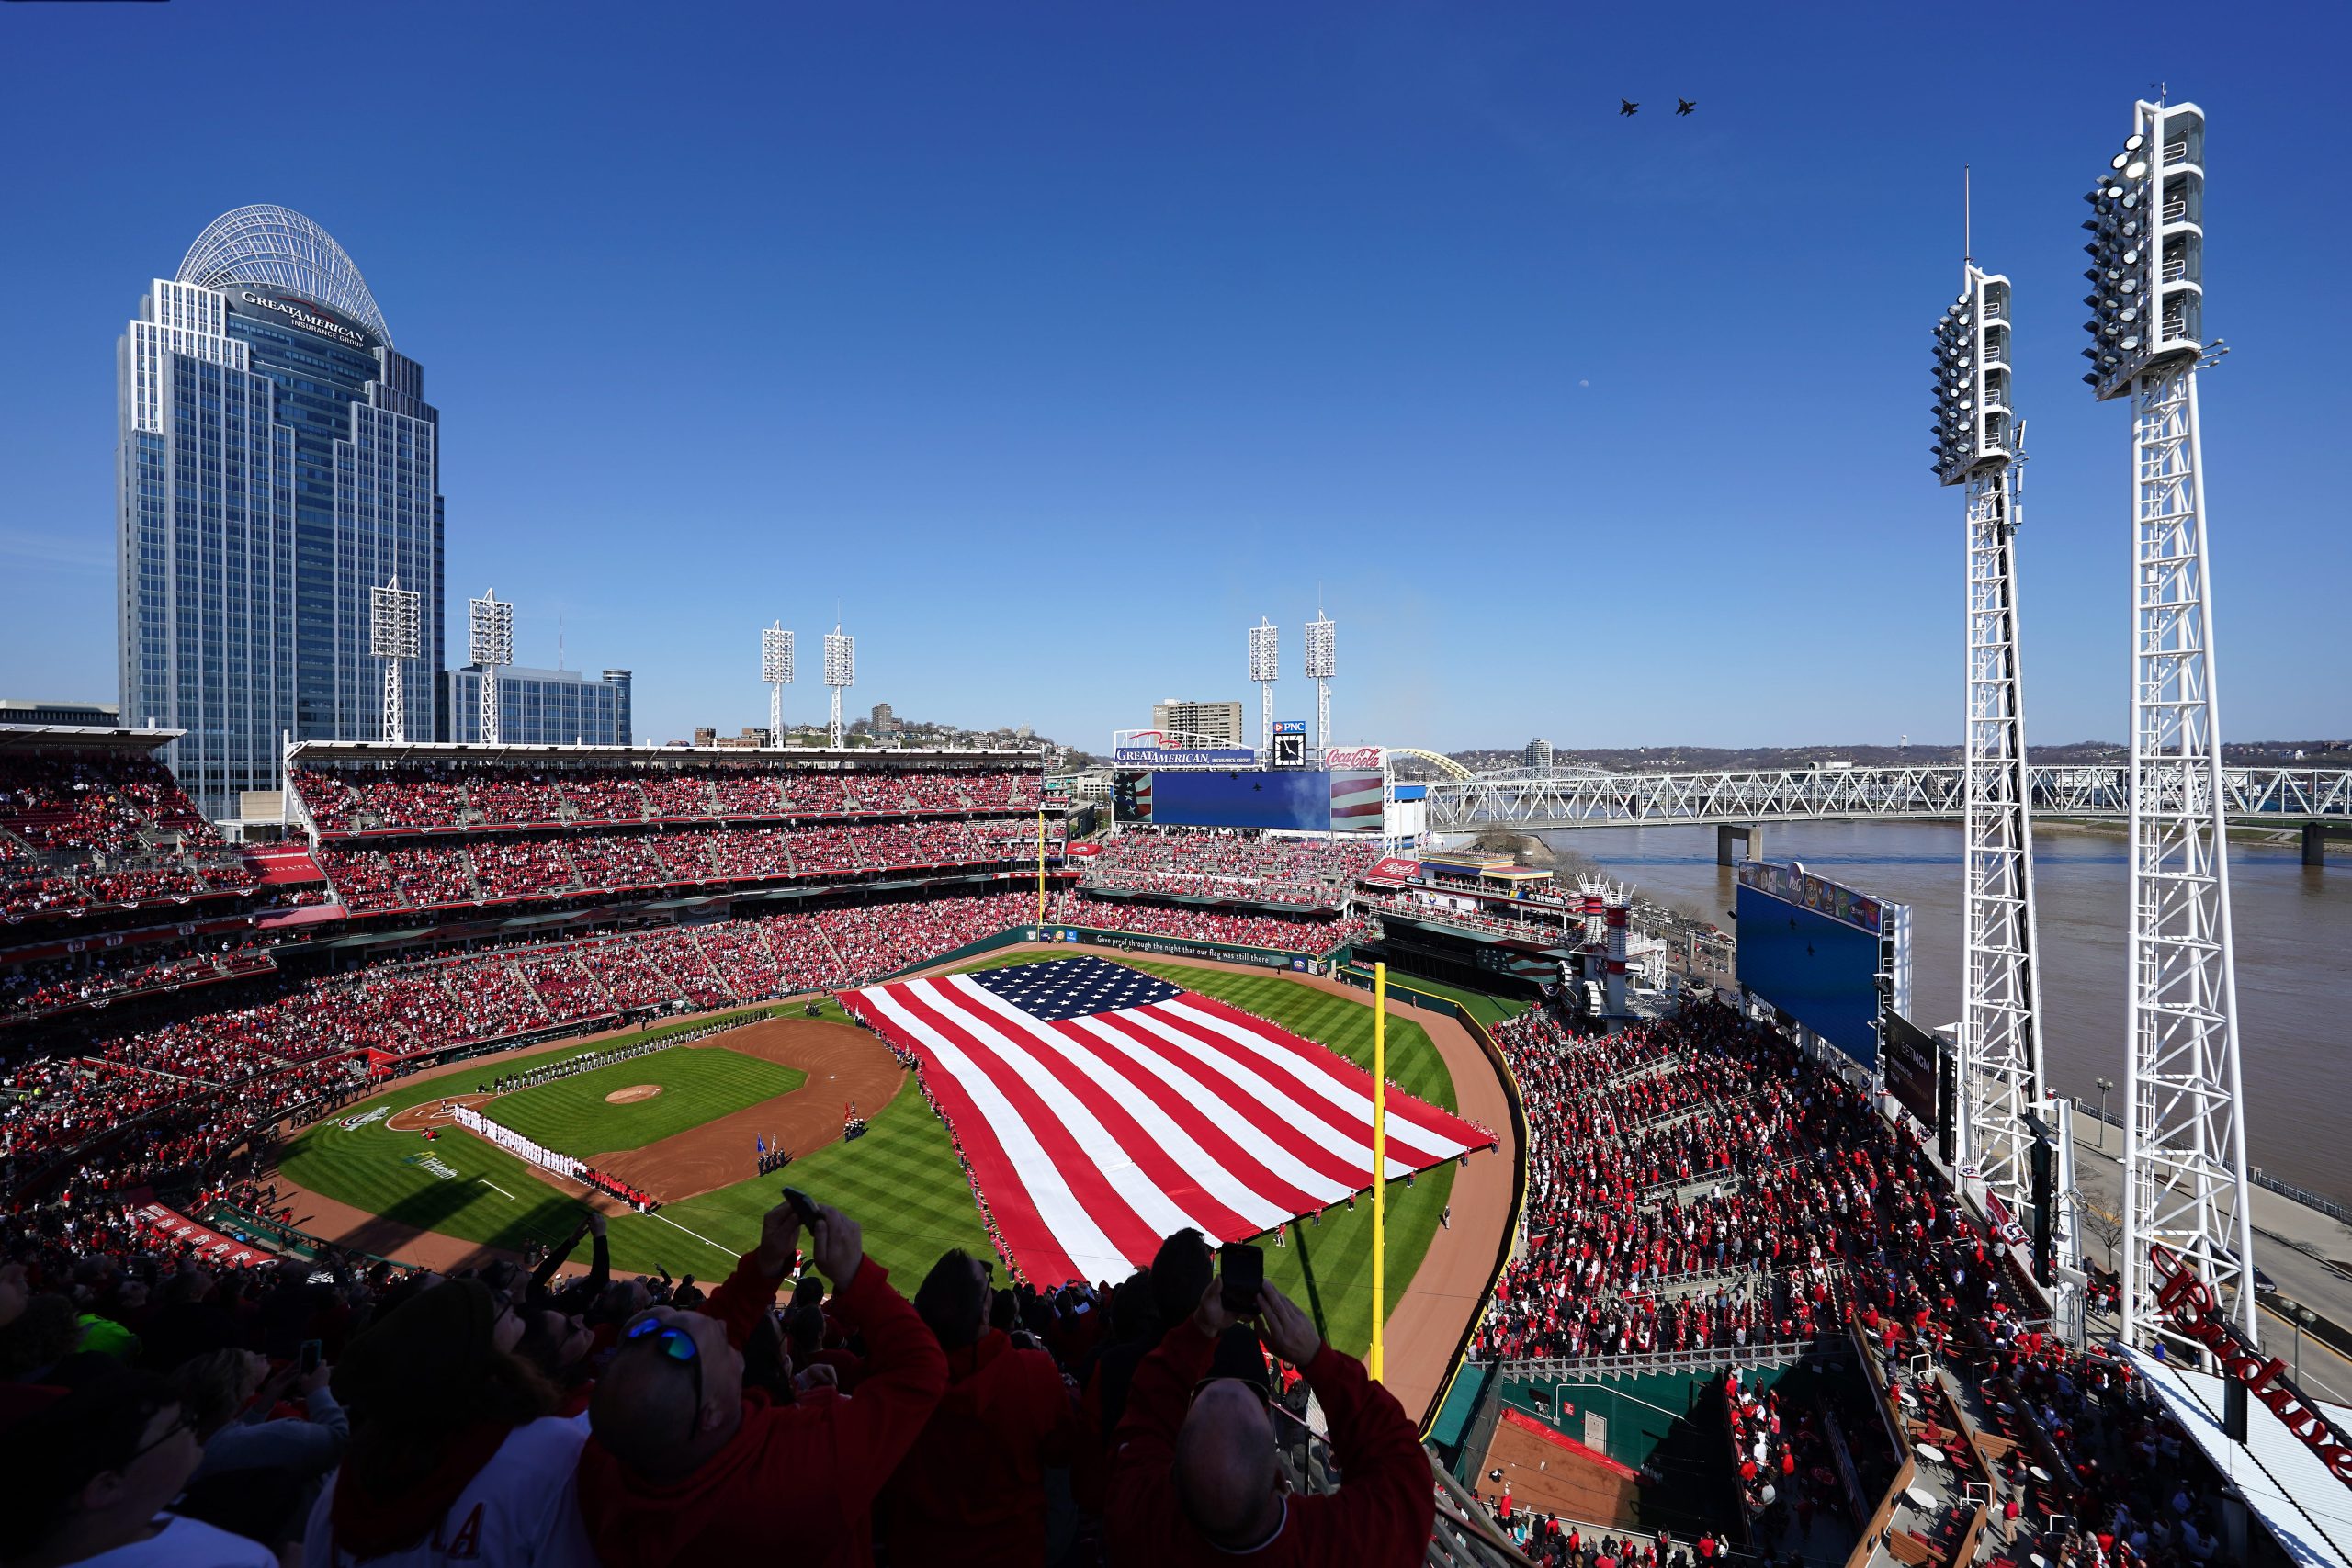 Reds fans in Great American Ballpark on Opening day